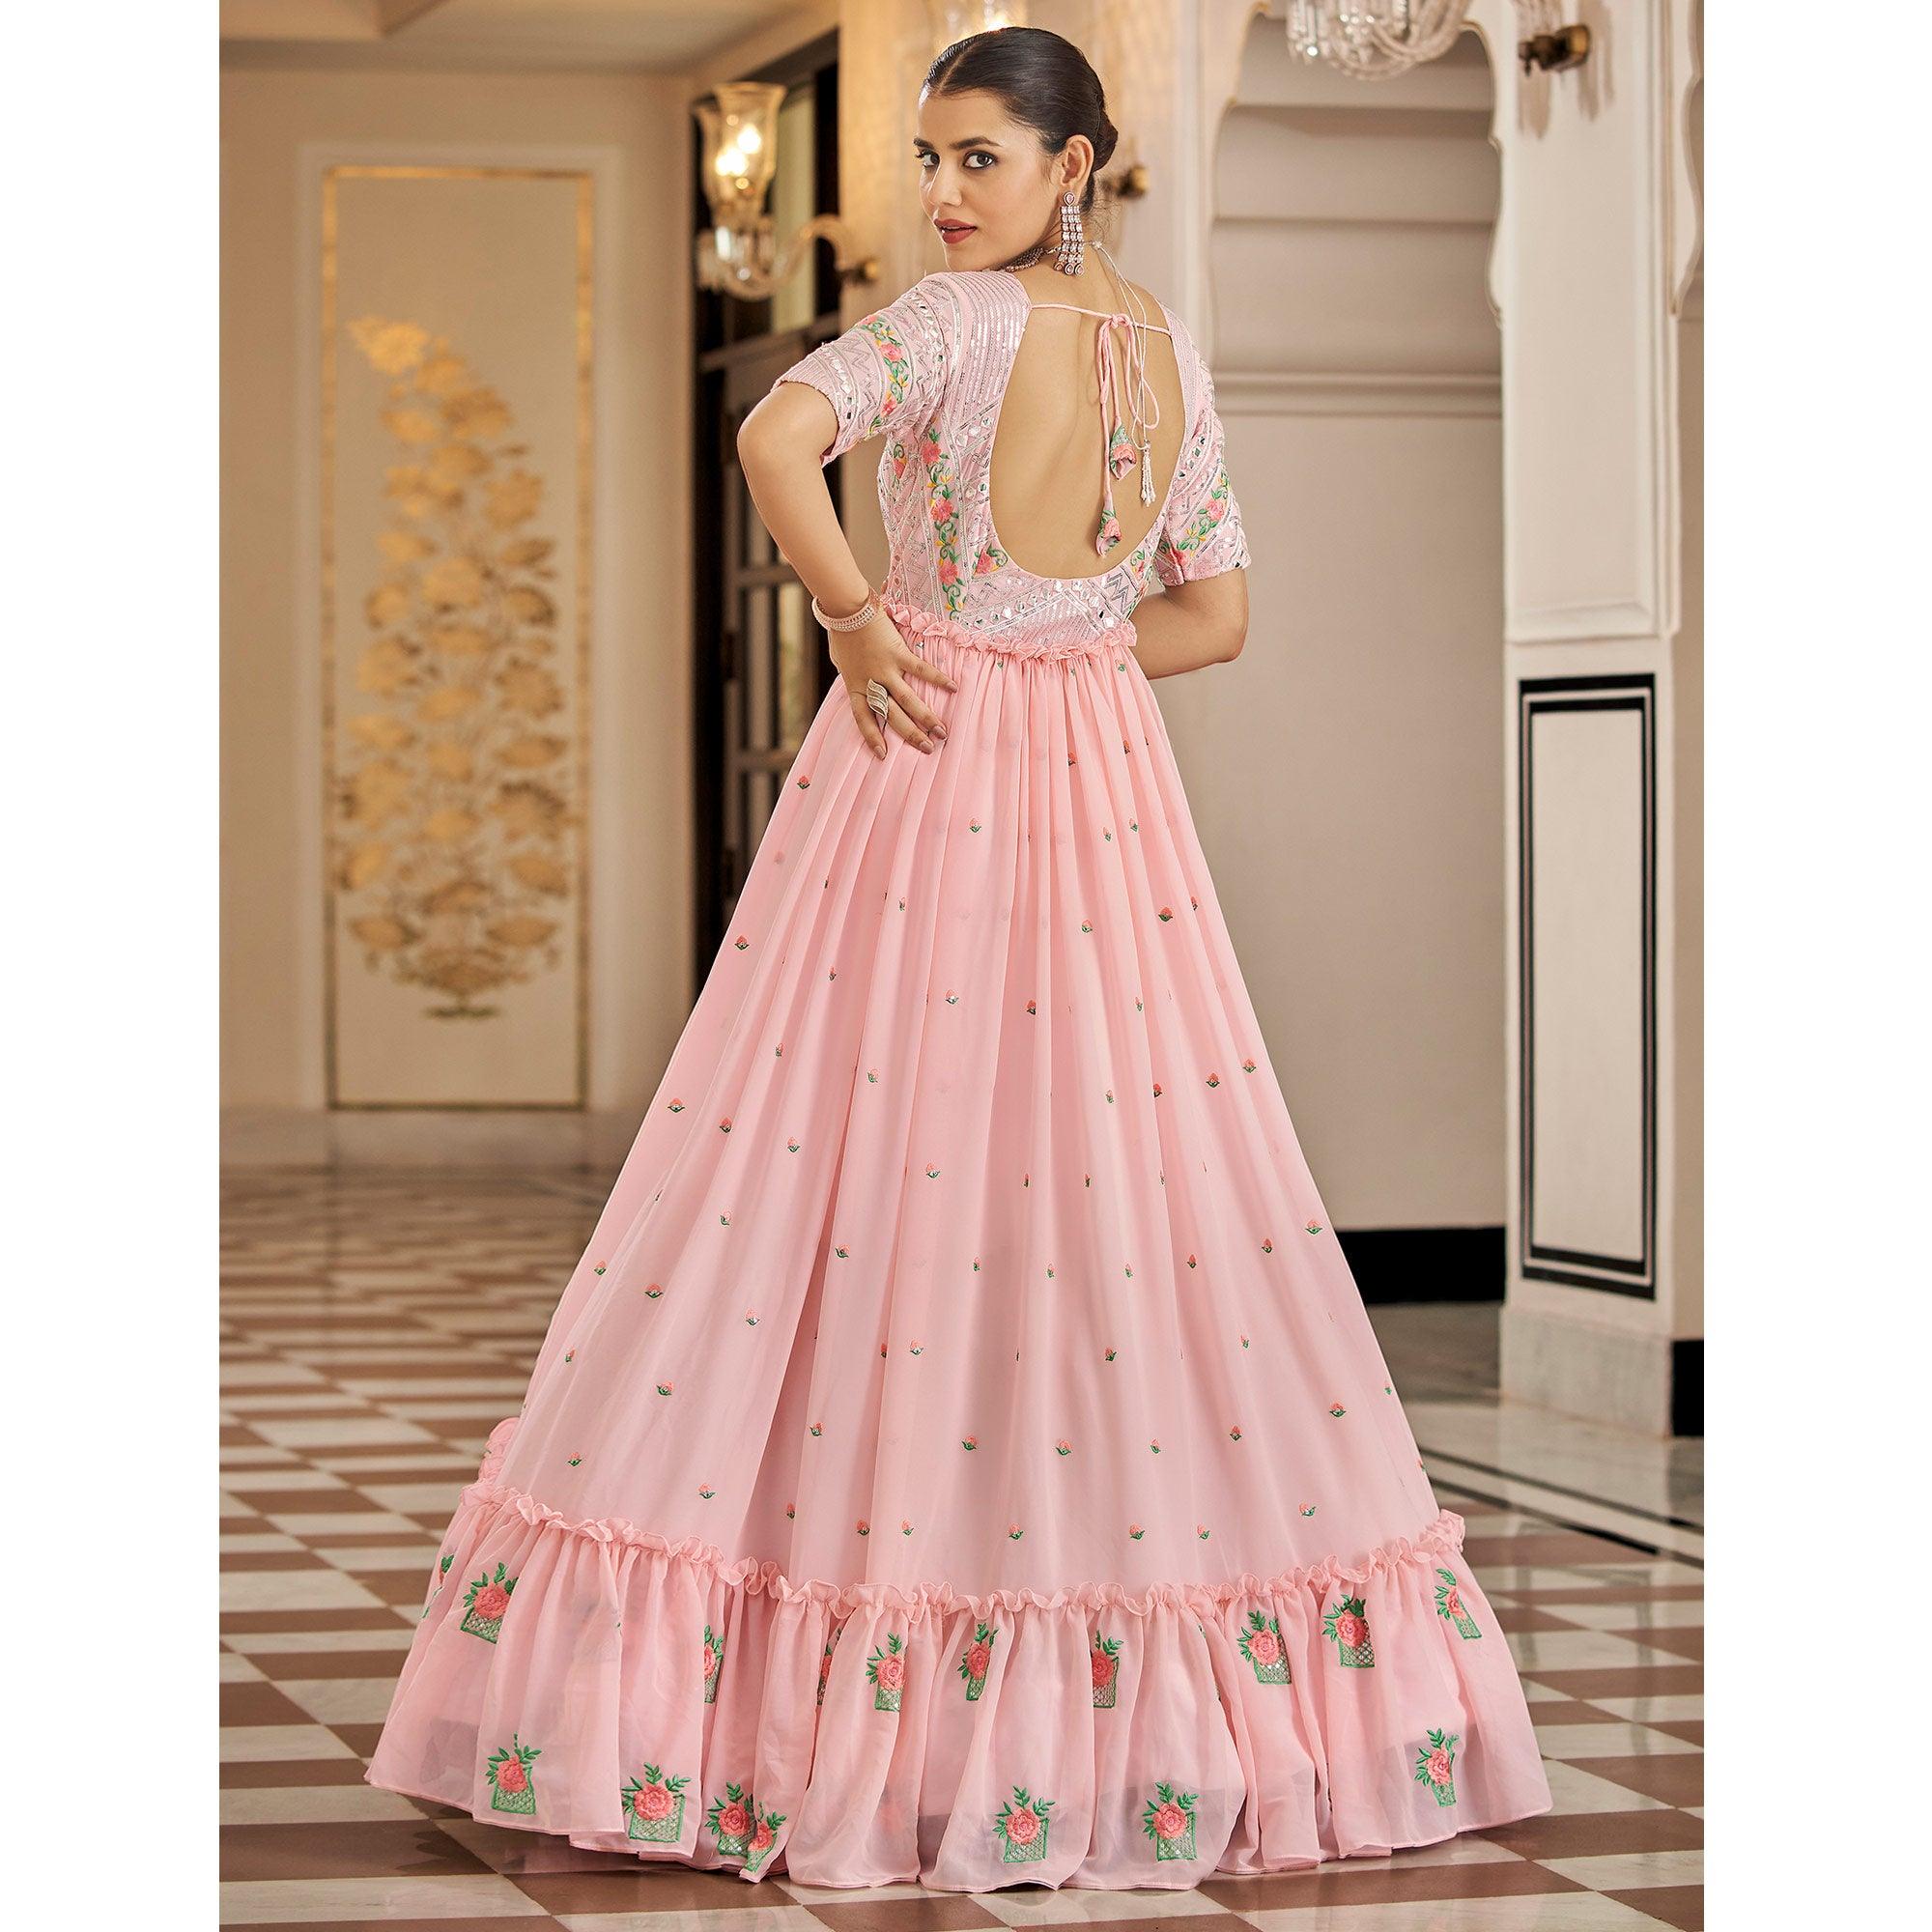 BABY PINK CLASSIC TULLE GOWN WITH A HAND EMBROIDERED BODICE, CUT OUT  DETAILS AND SILVER EMBELLISHMENTS. - Seasons India